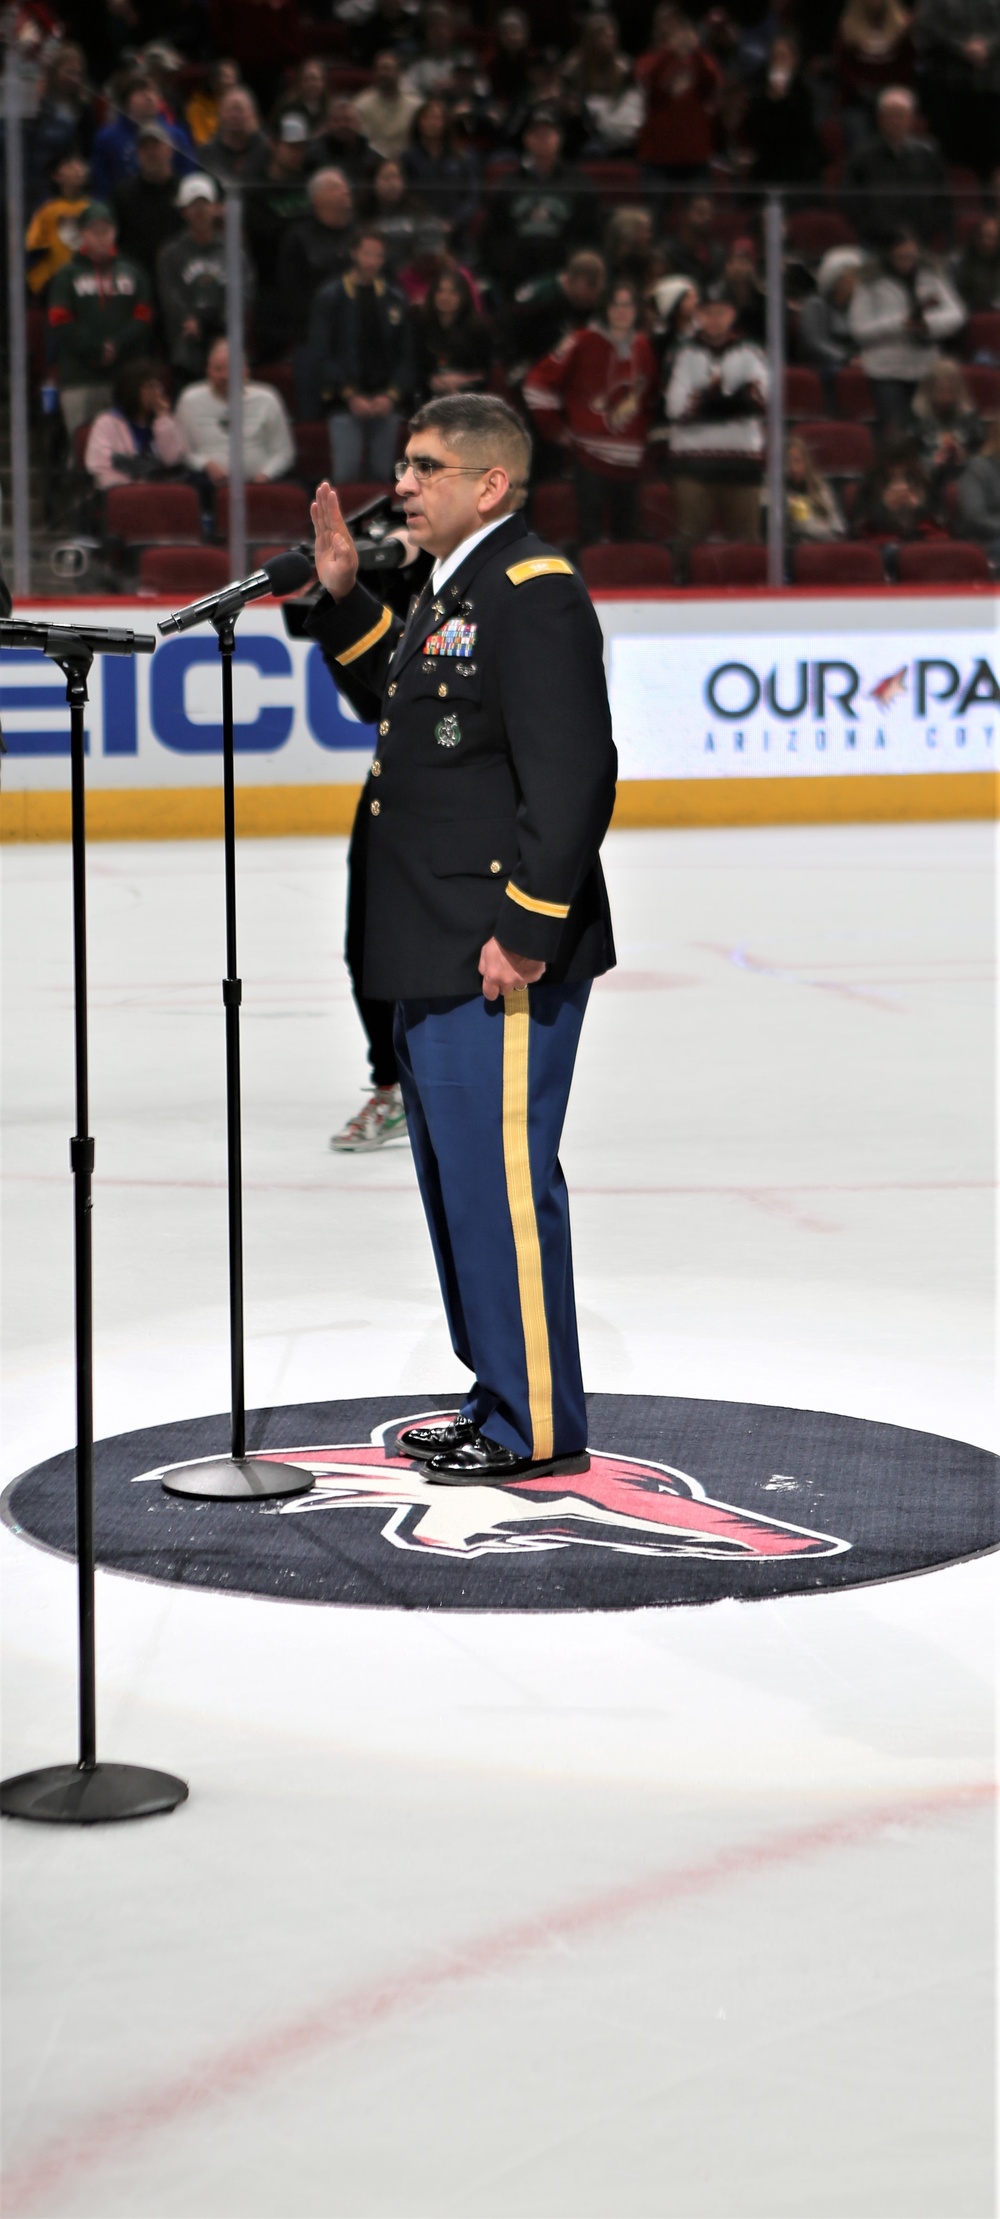 Phoenix Recruiting Battalion conducts mass enlistment ceremony at NHL game